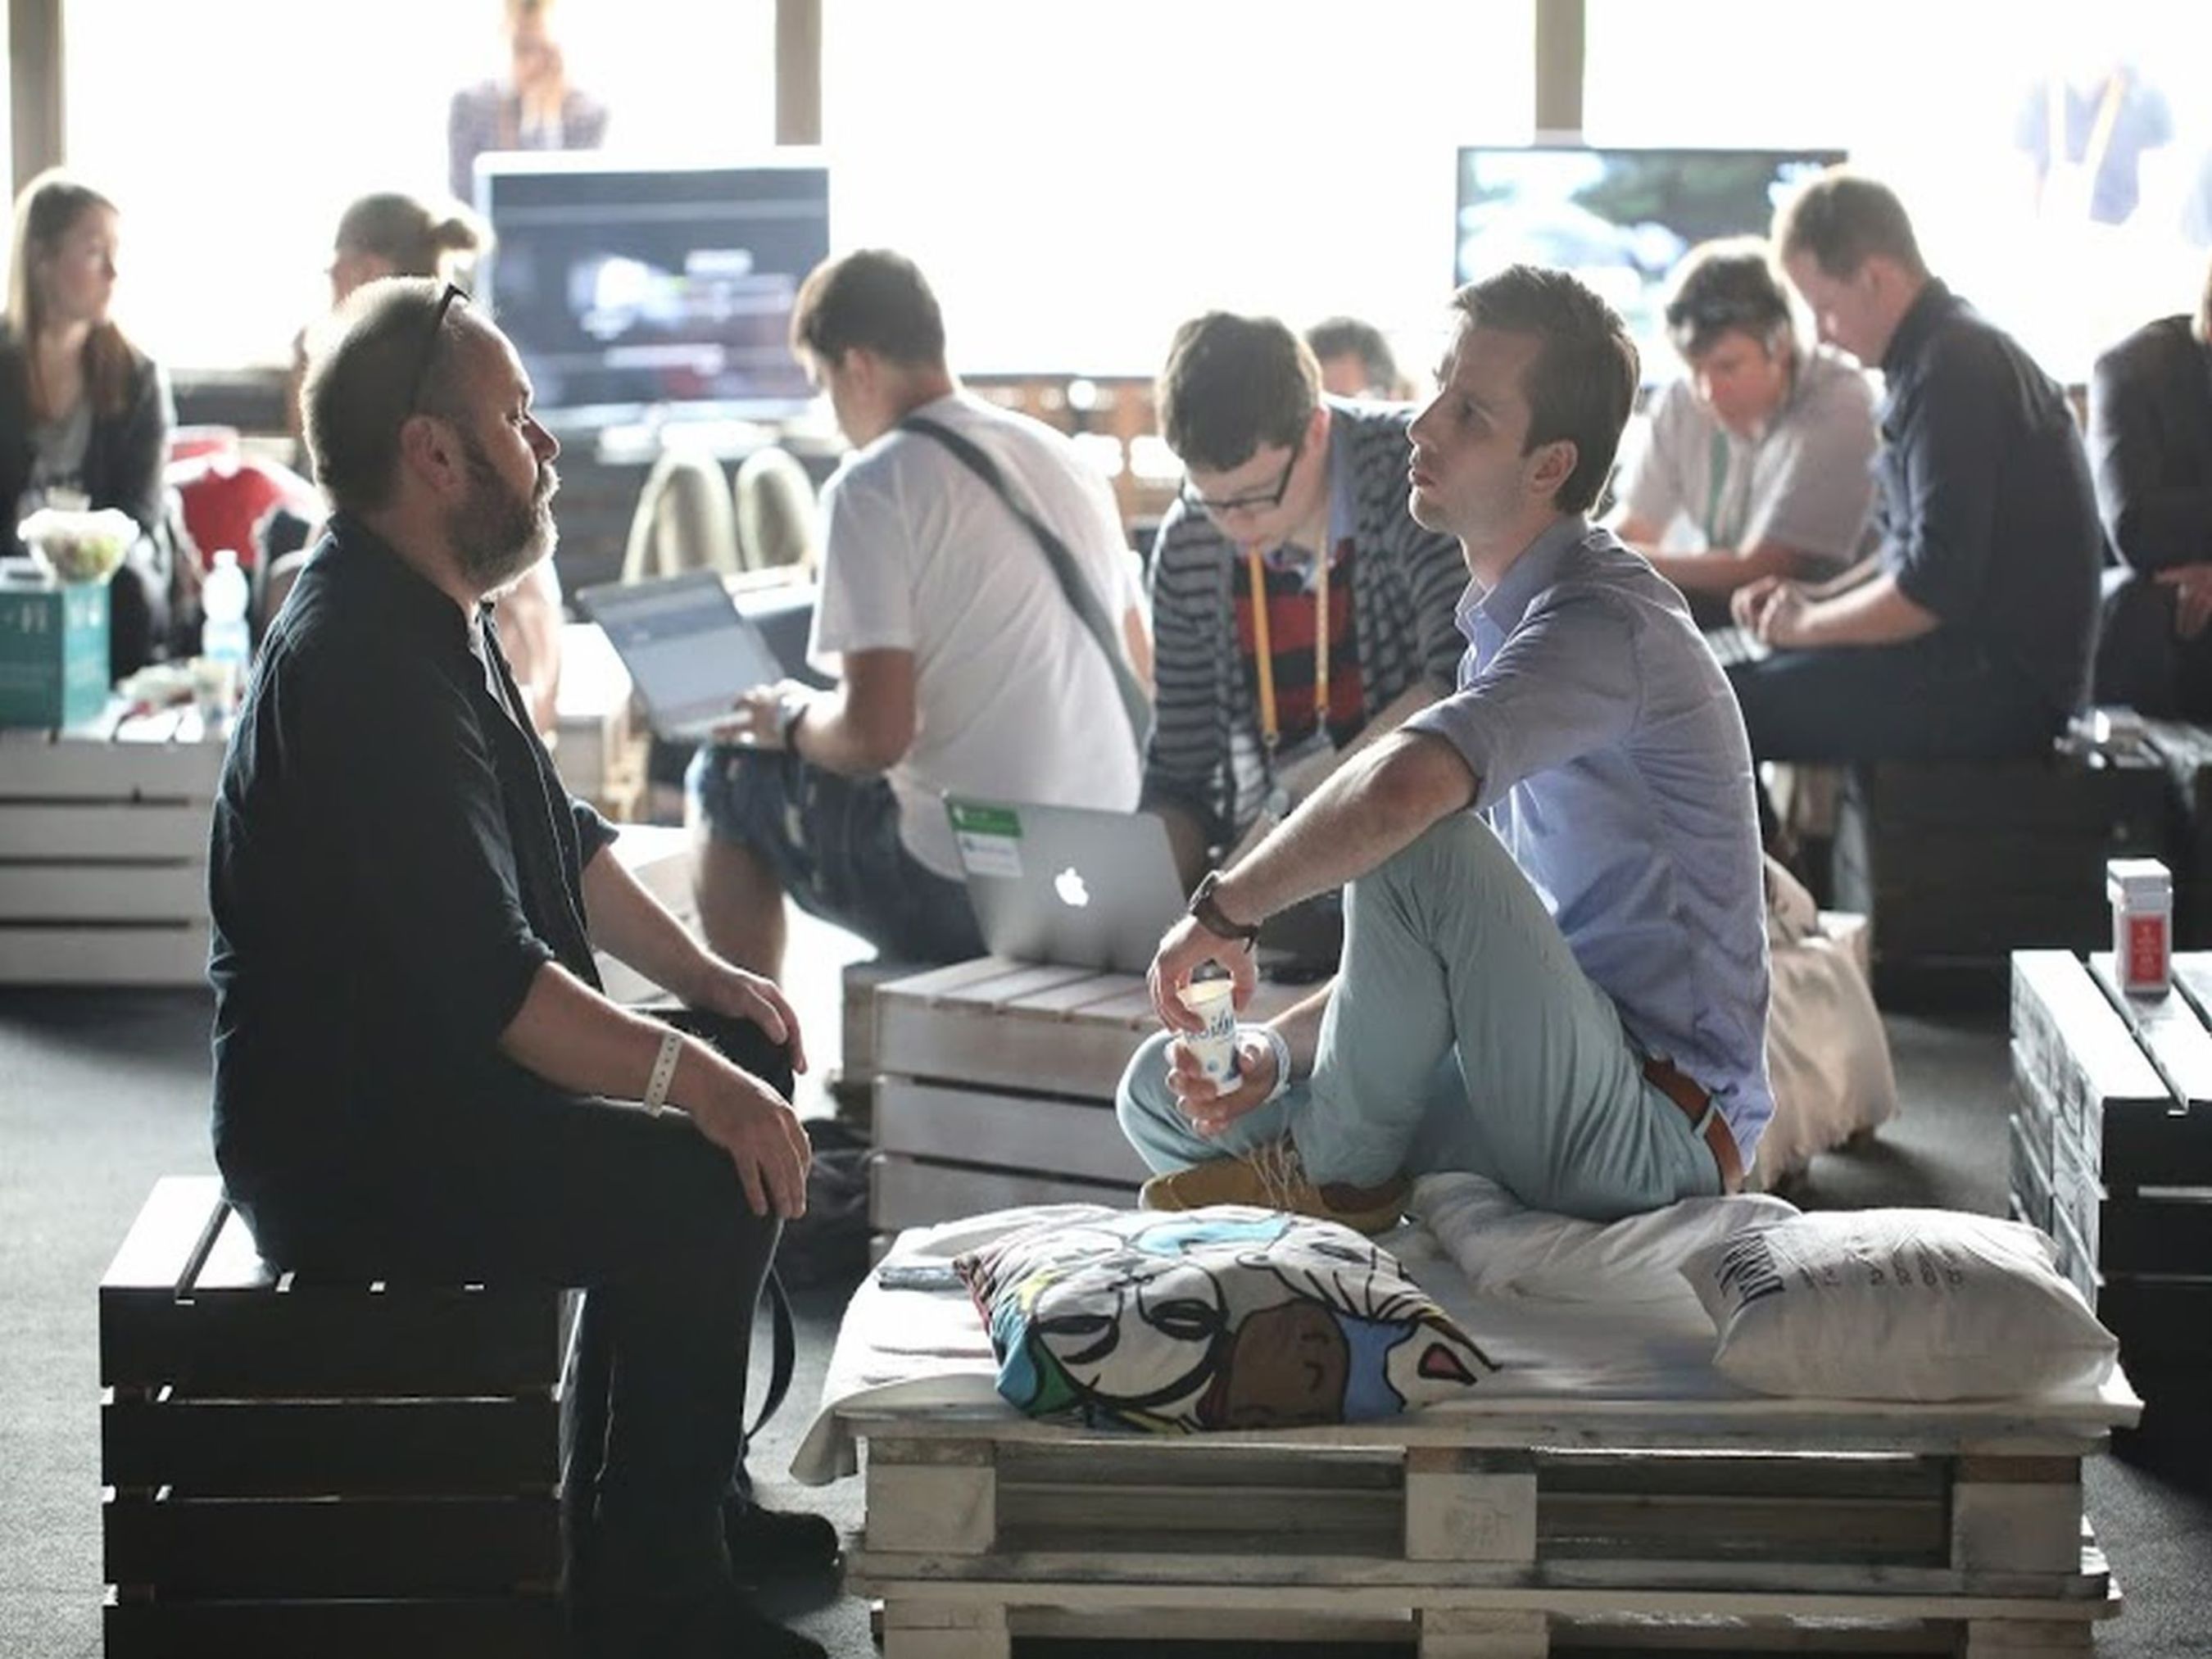 Investors and startupers during Bitspiration 2014. Pic by PROIDEA (PRNewsFoto/PROIDEA)